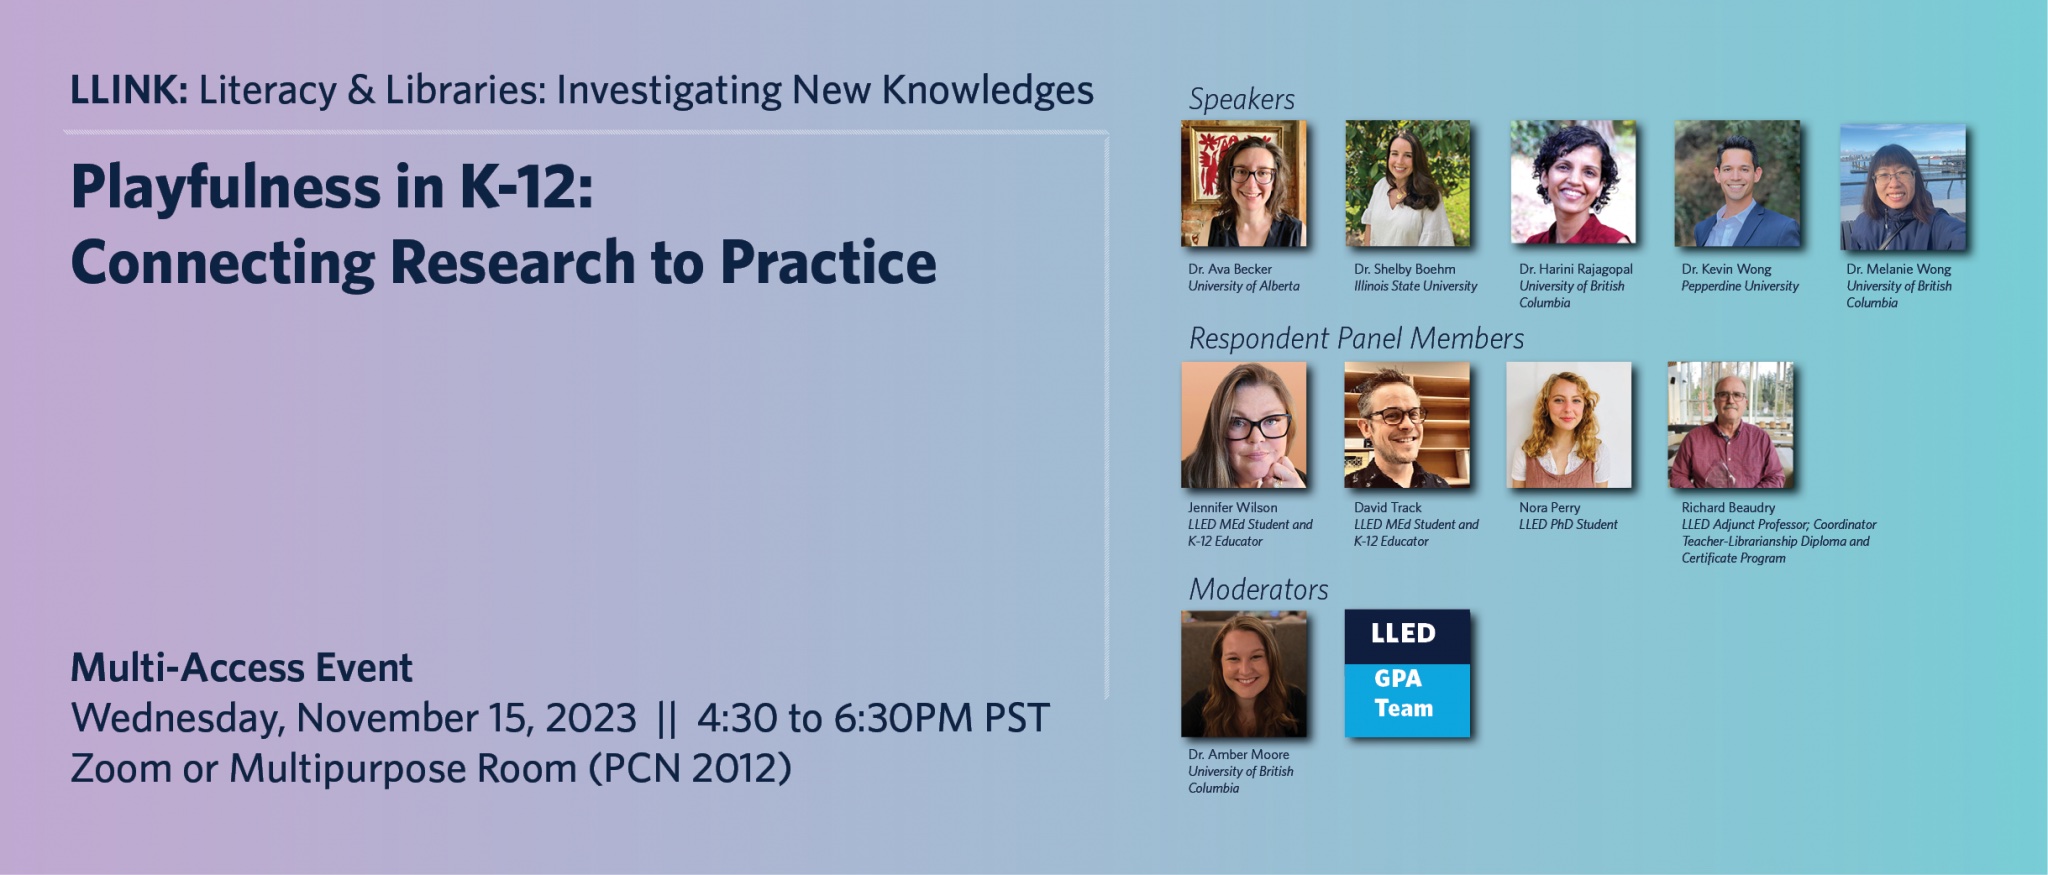 Investigating New Knowledges - Playfulness in K-12: Connecting Research to Practice promotional poster